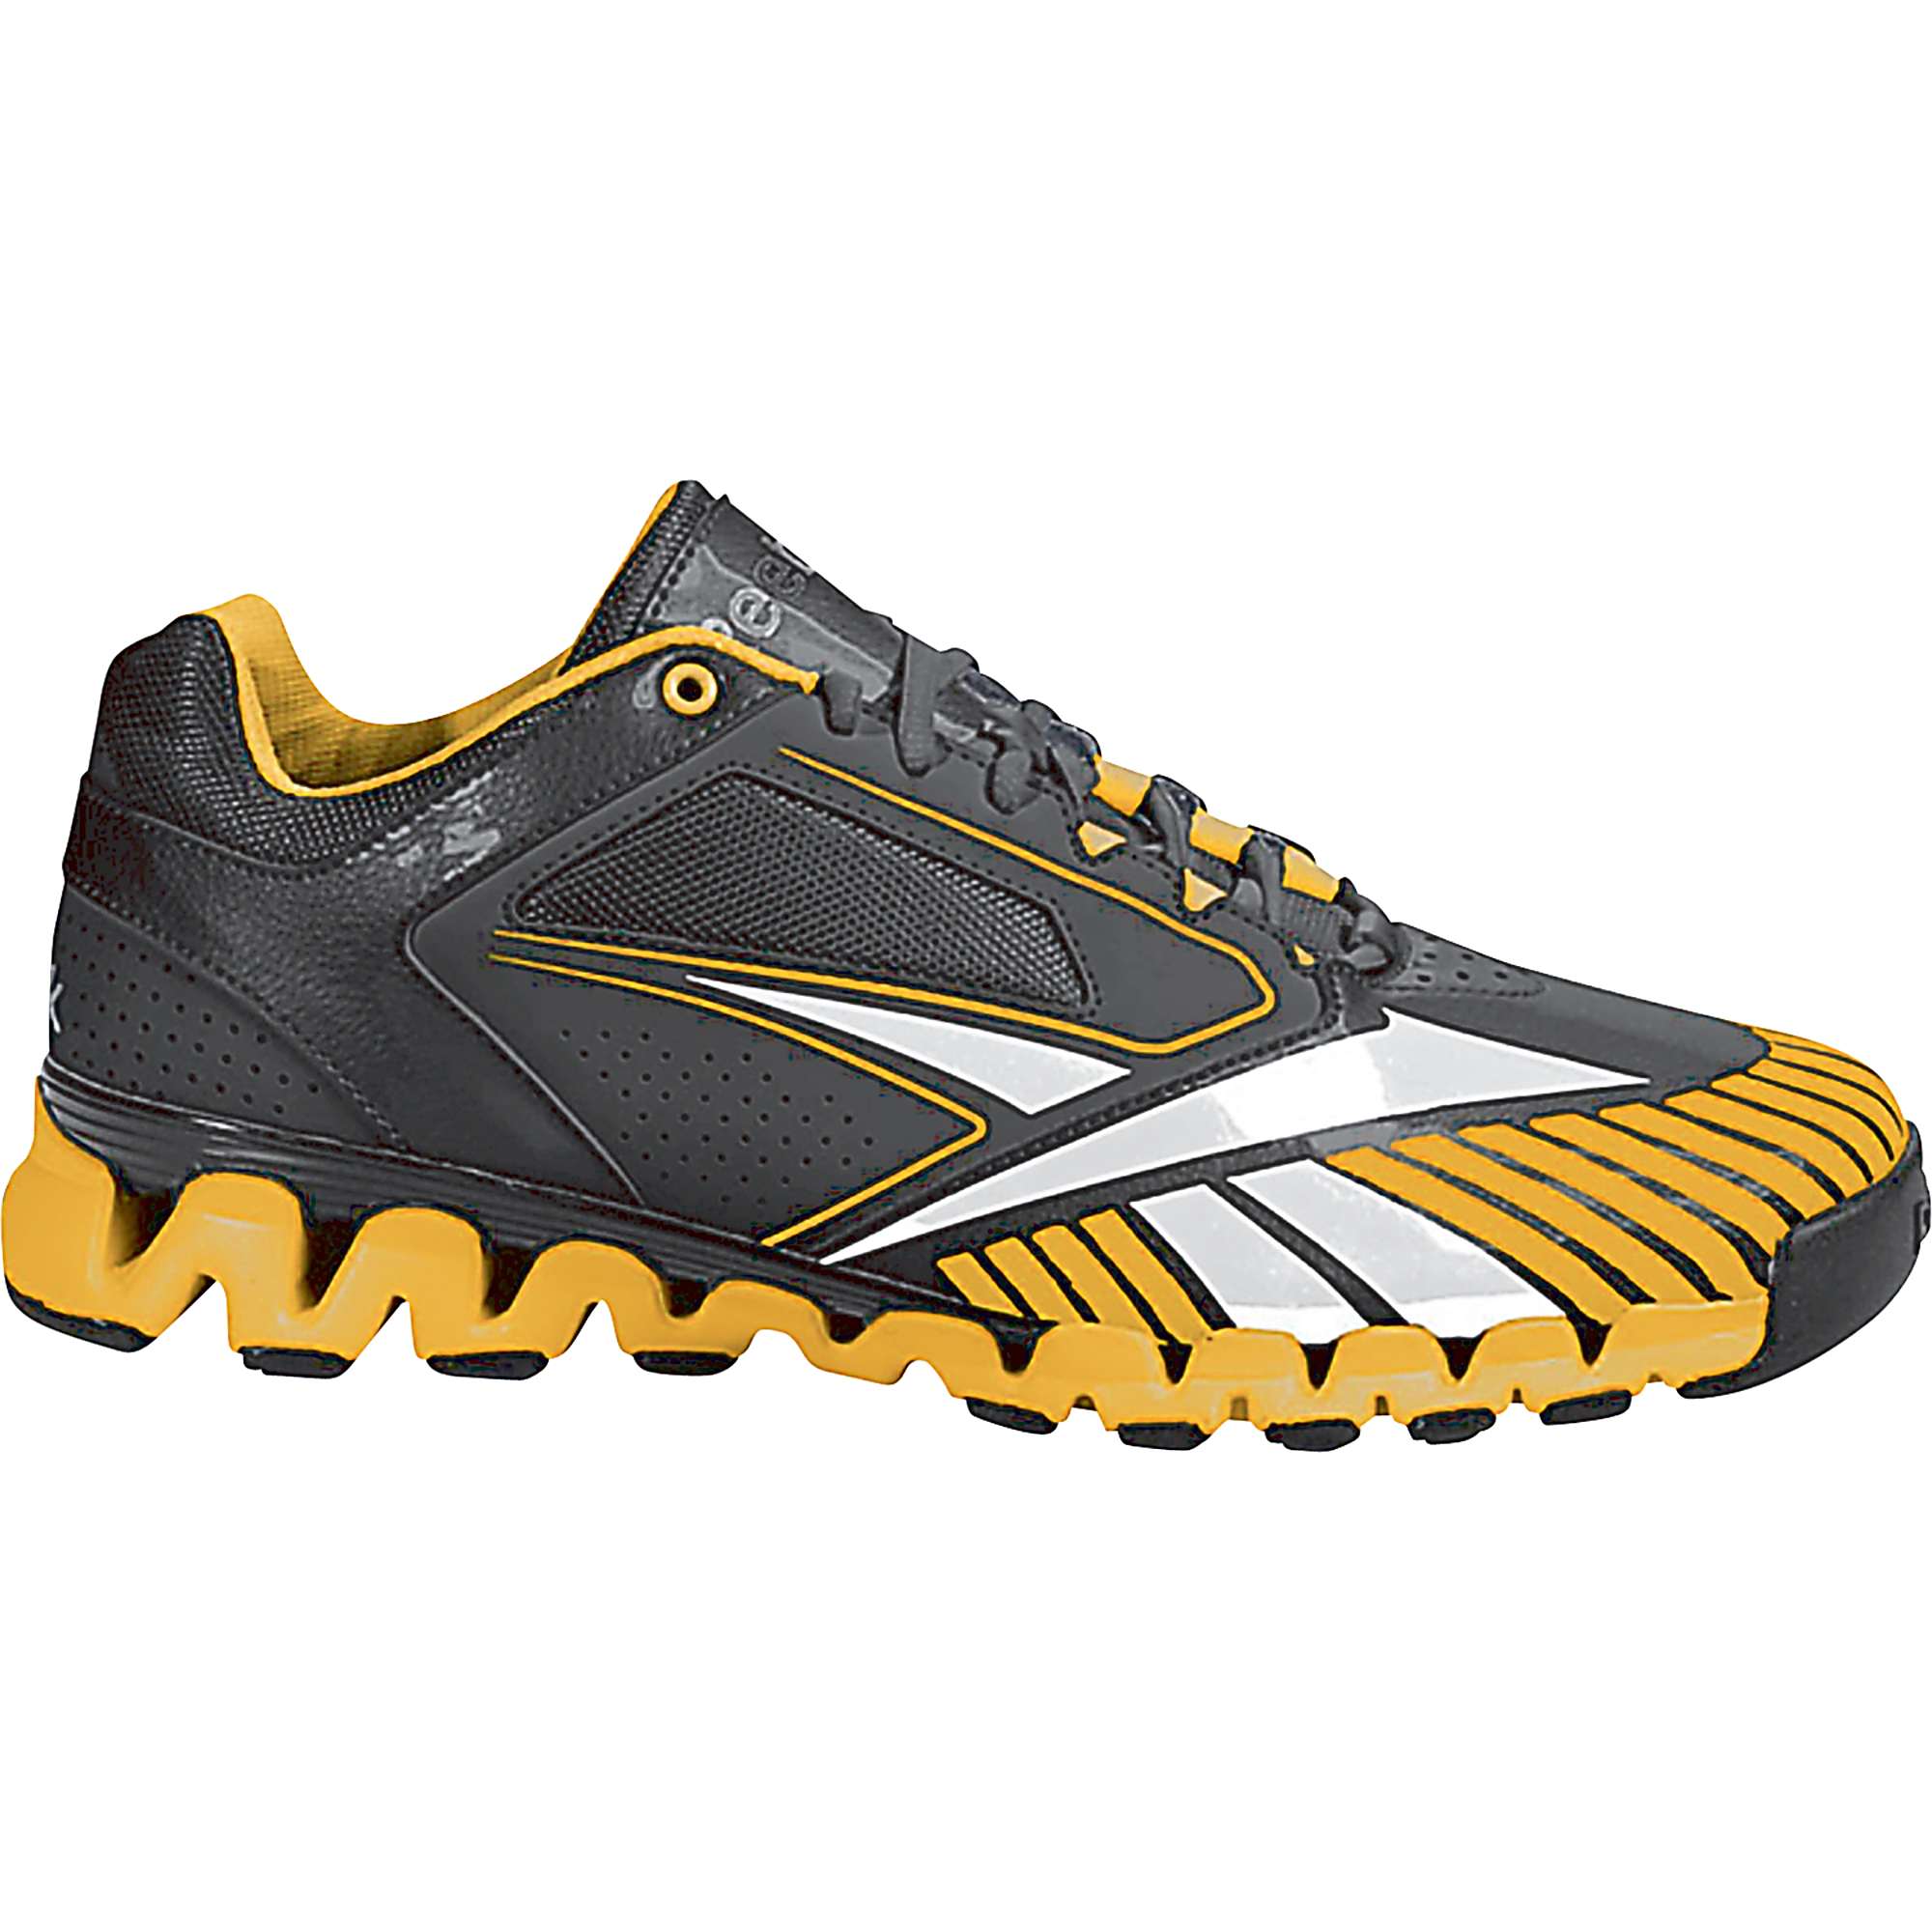 ***NEW***REEBOK ZIG COOPERSTOWN TRAINER 2.0 BLACK/REEBOK GOLD - Click Image to Close